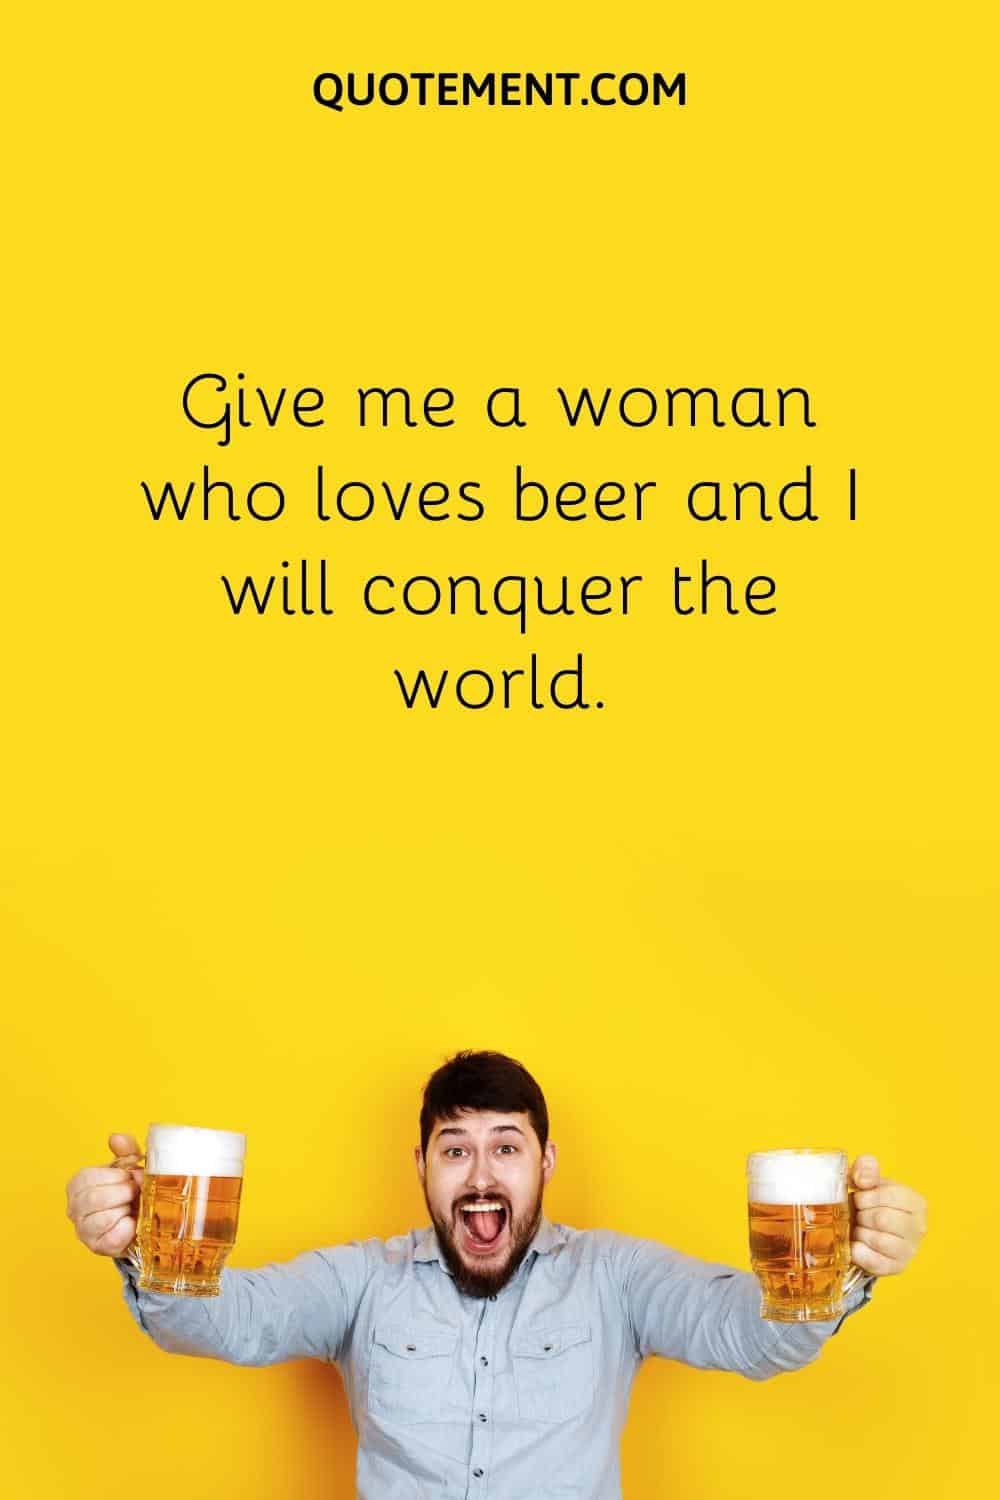 Give me a woman who loves beer and I will conquer the world.